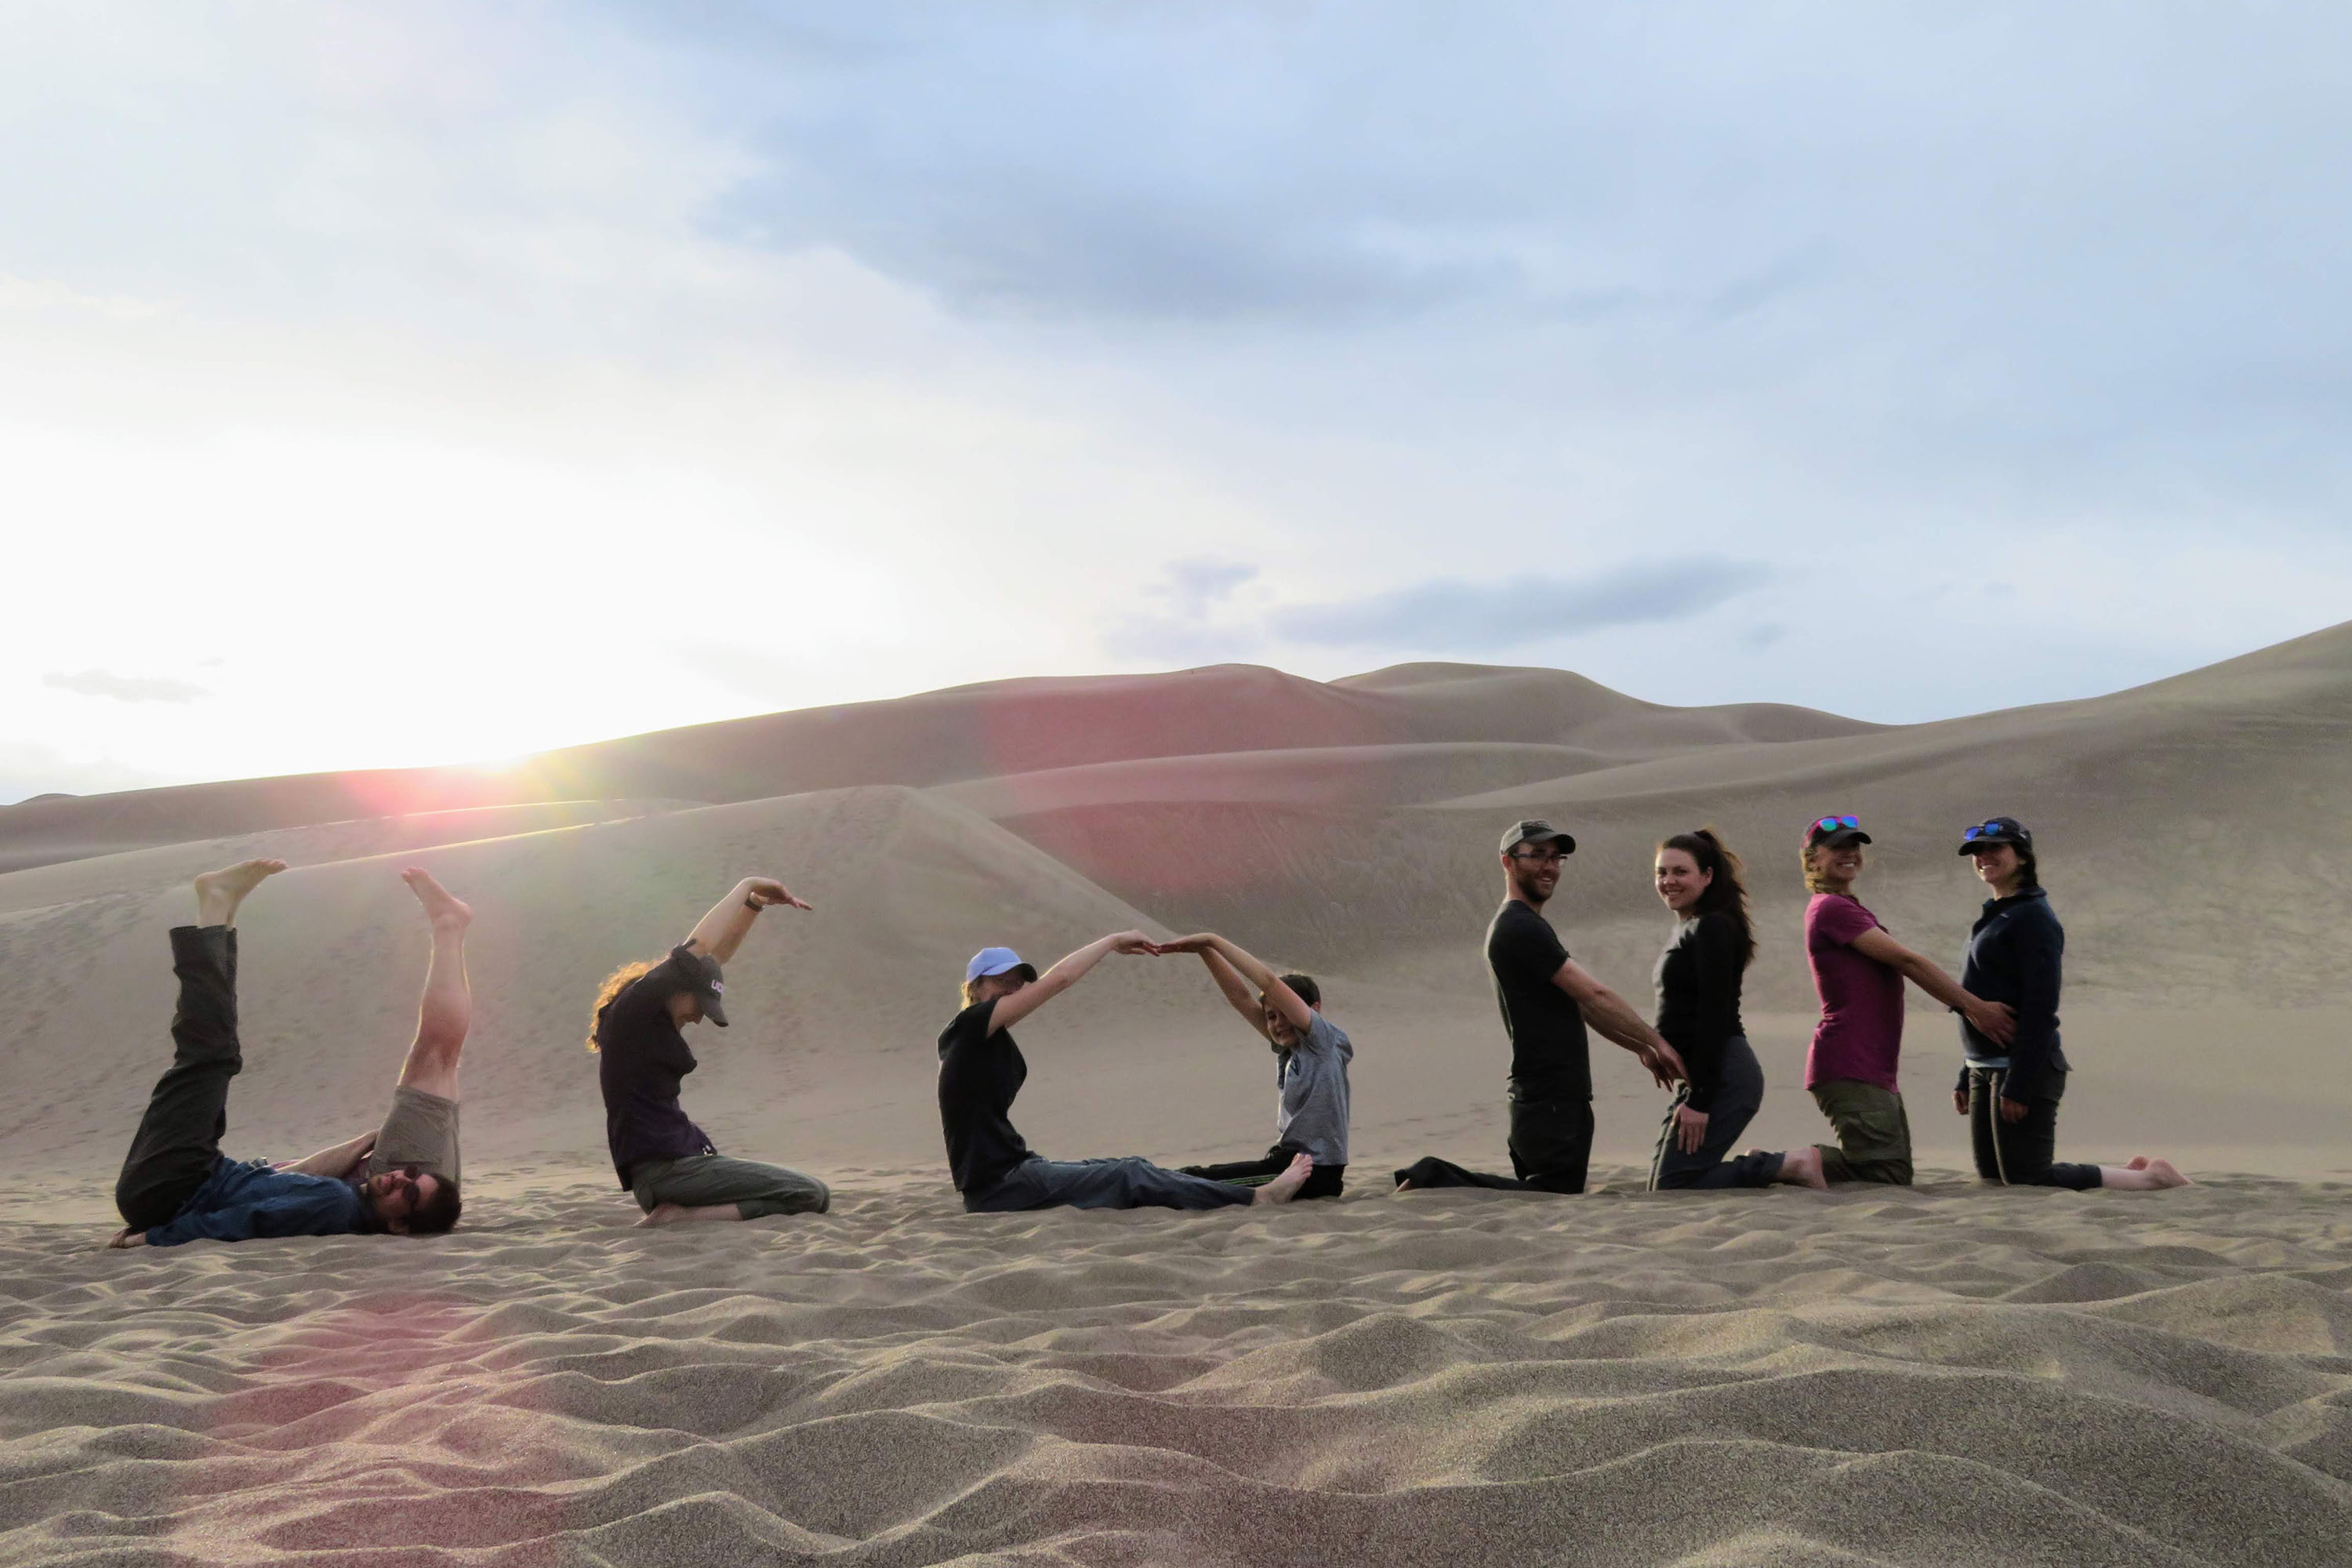 Students on dune: Geosciences students spell 'UConn' in May 2018 at Great Sand Dunes National Park and Preserve, Colorado. The trip was part of a field course, 'Field Geology & Landscapes of the Western U.S.,' which included a two-week field trip to Colorado, Utah, and Arizona. (Will Ouimet/UConn Photo)